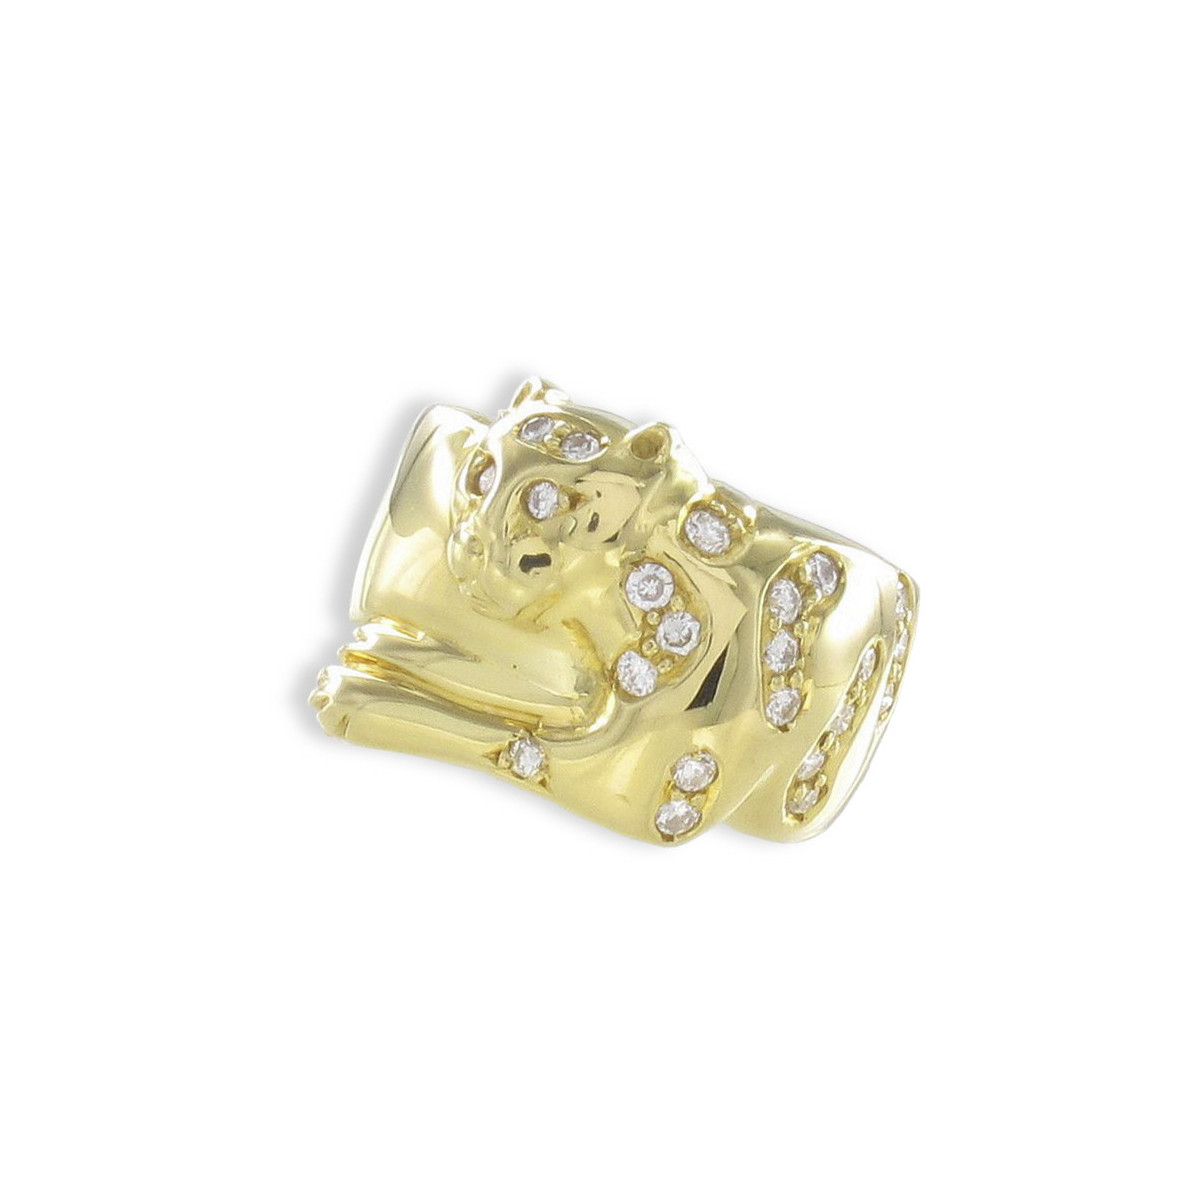 GOLD PANTHER RING WITH DIAMONDS